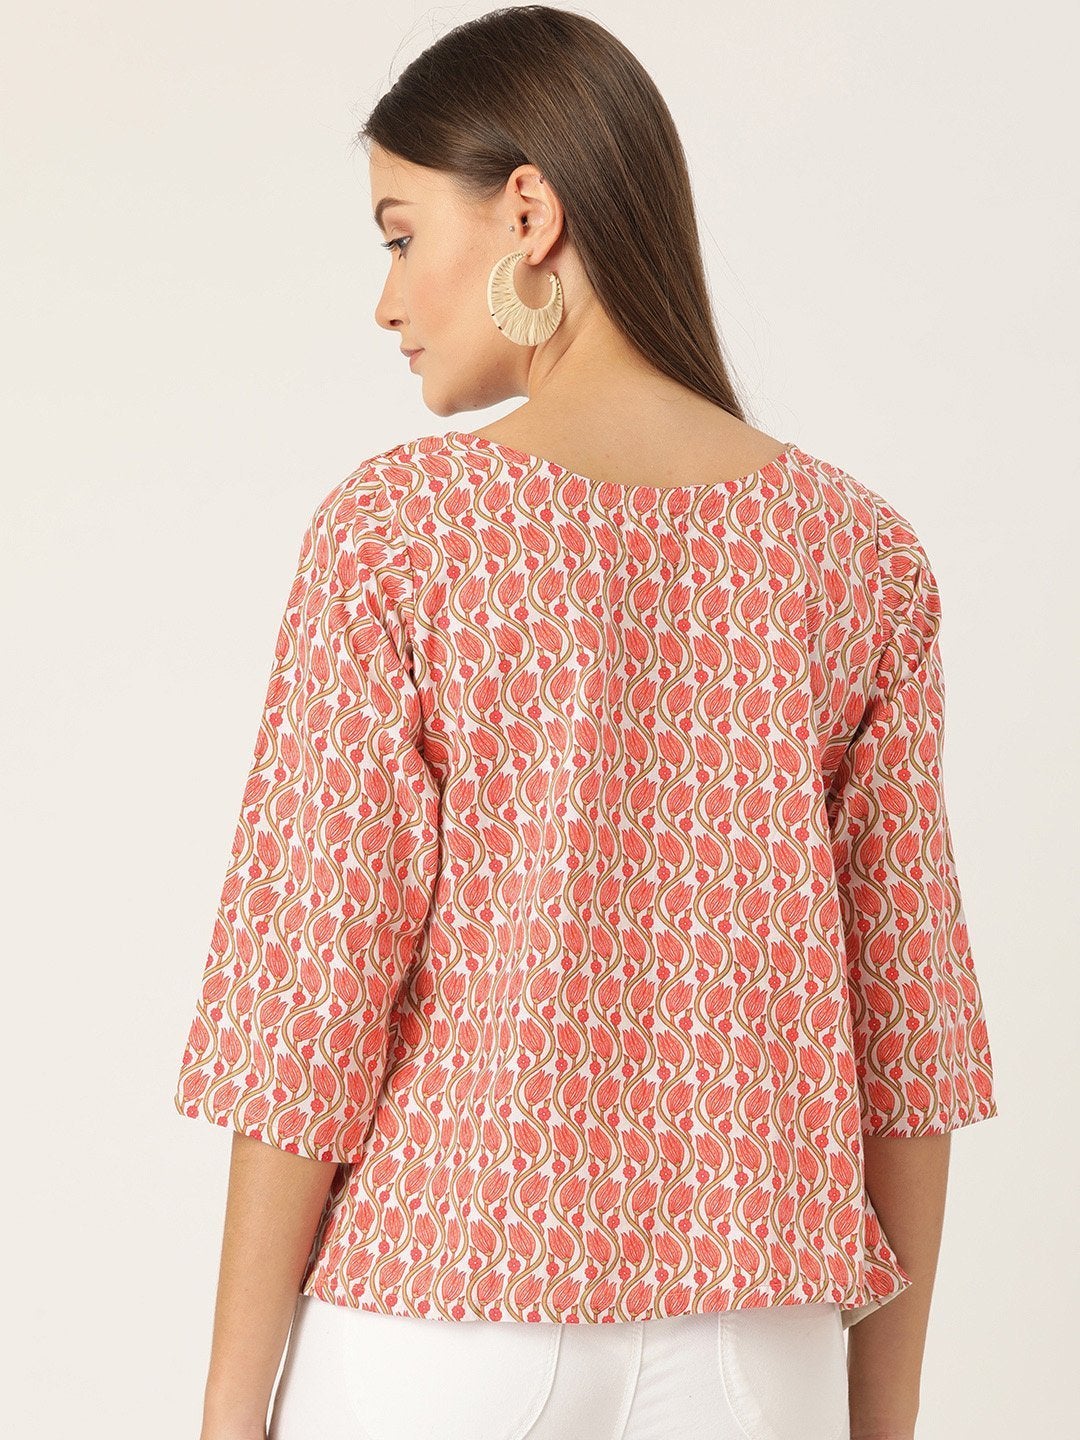 Women's Pink Floral Frill Top - InWeave